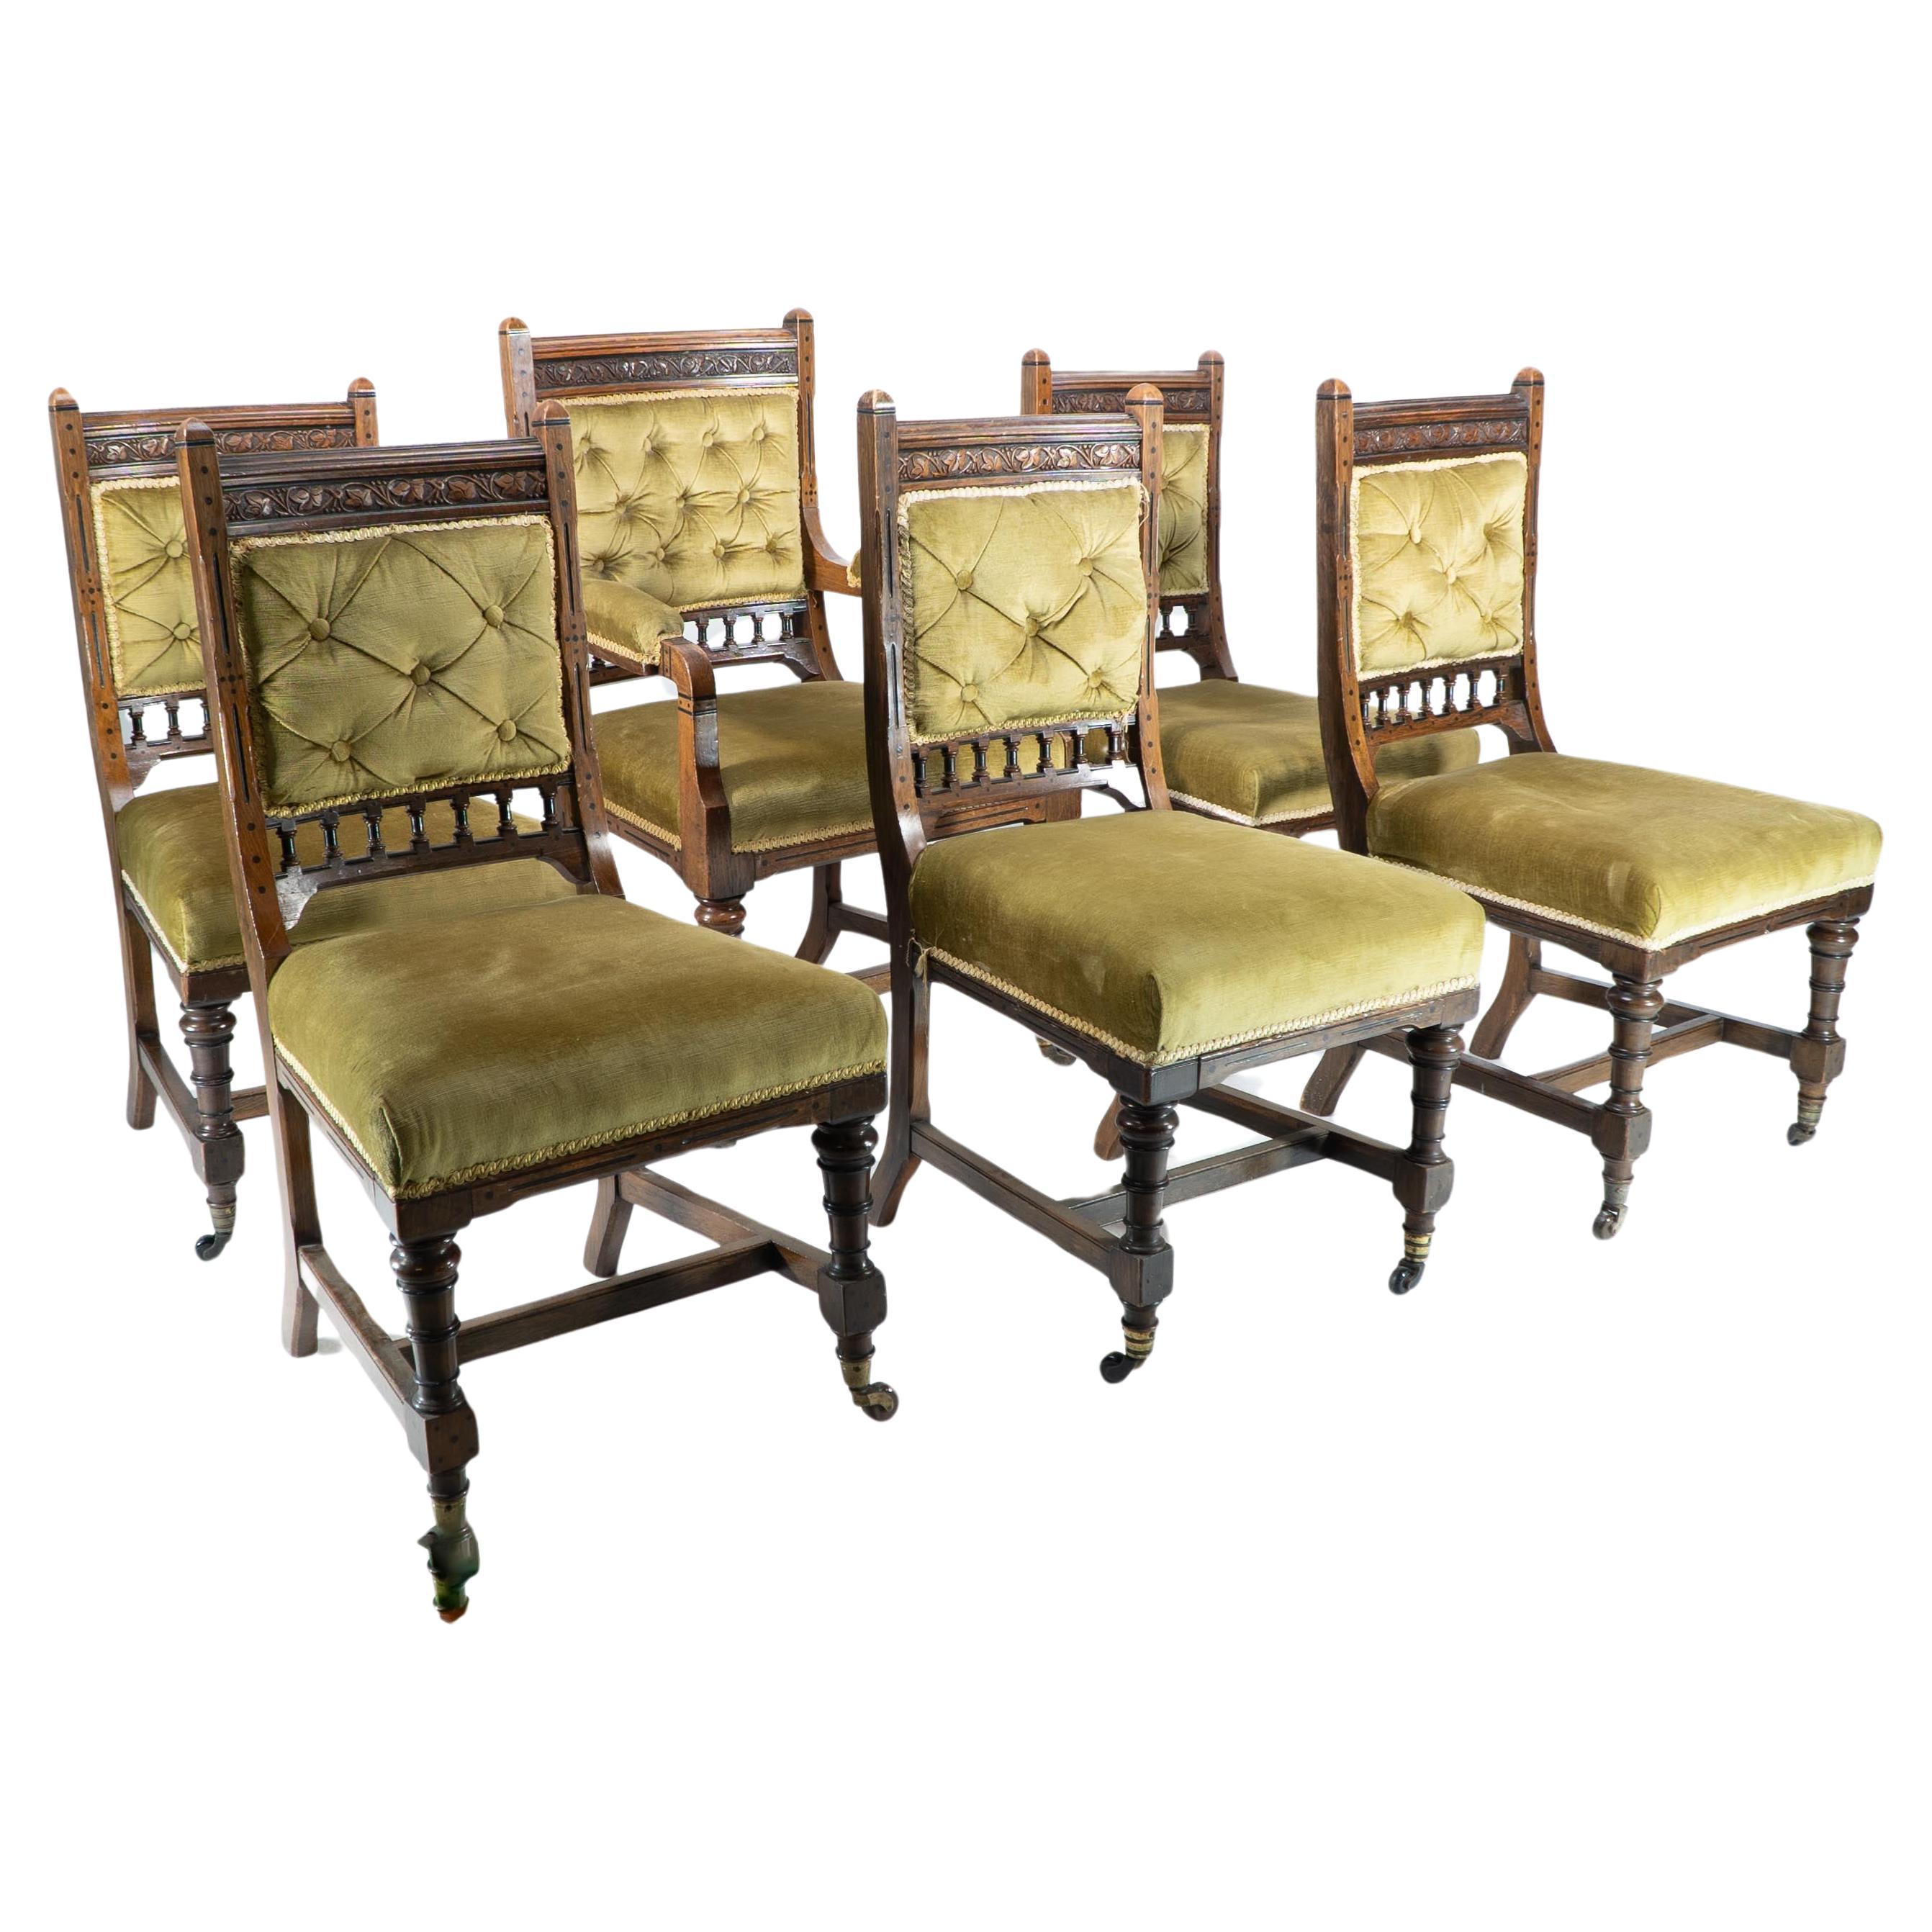 Charles Bevan attr. A set of five Gothic Revival oak dining chairs & an armchair